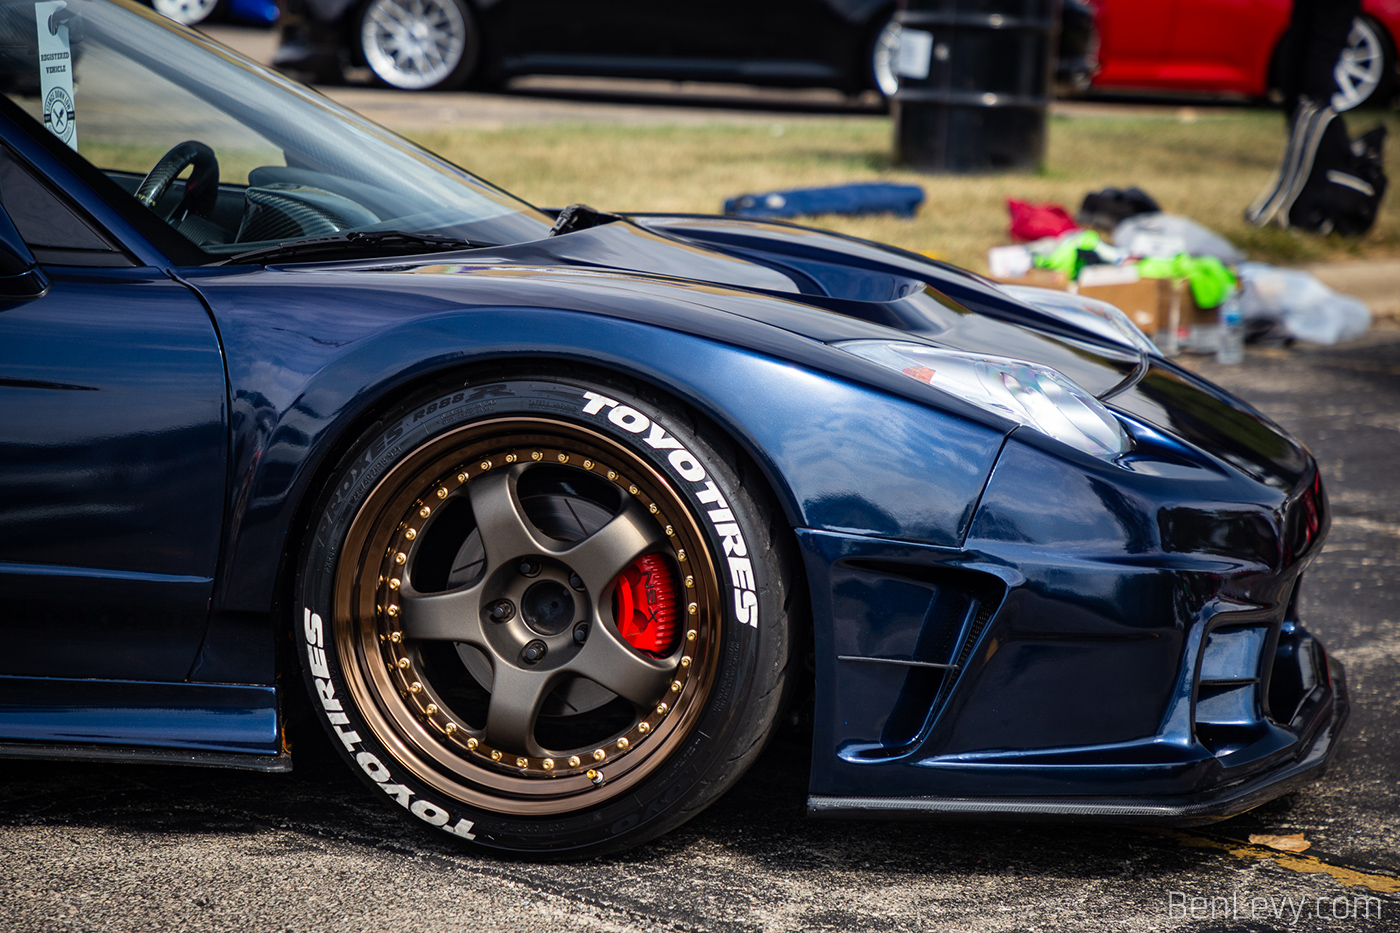 Acura NSX with Wide Body Kit